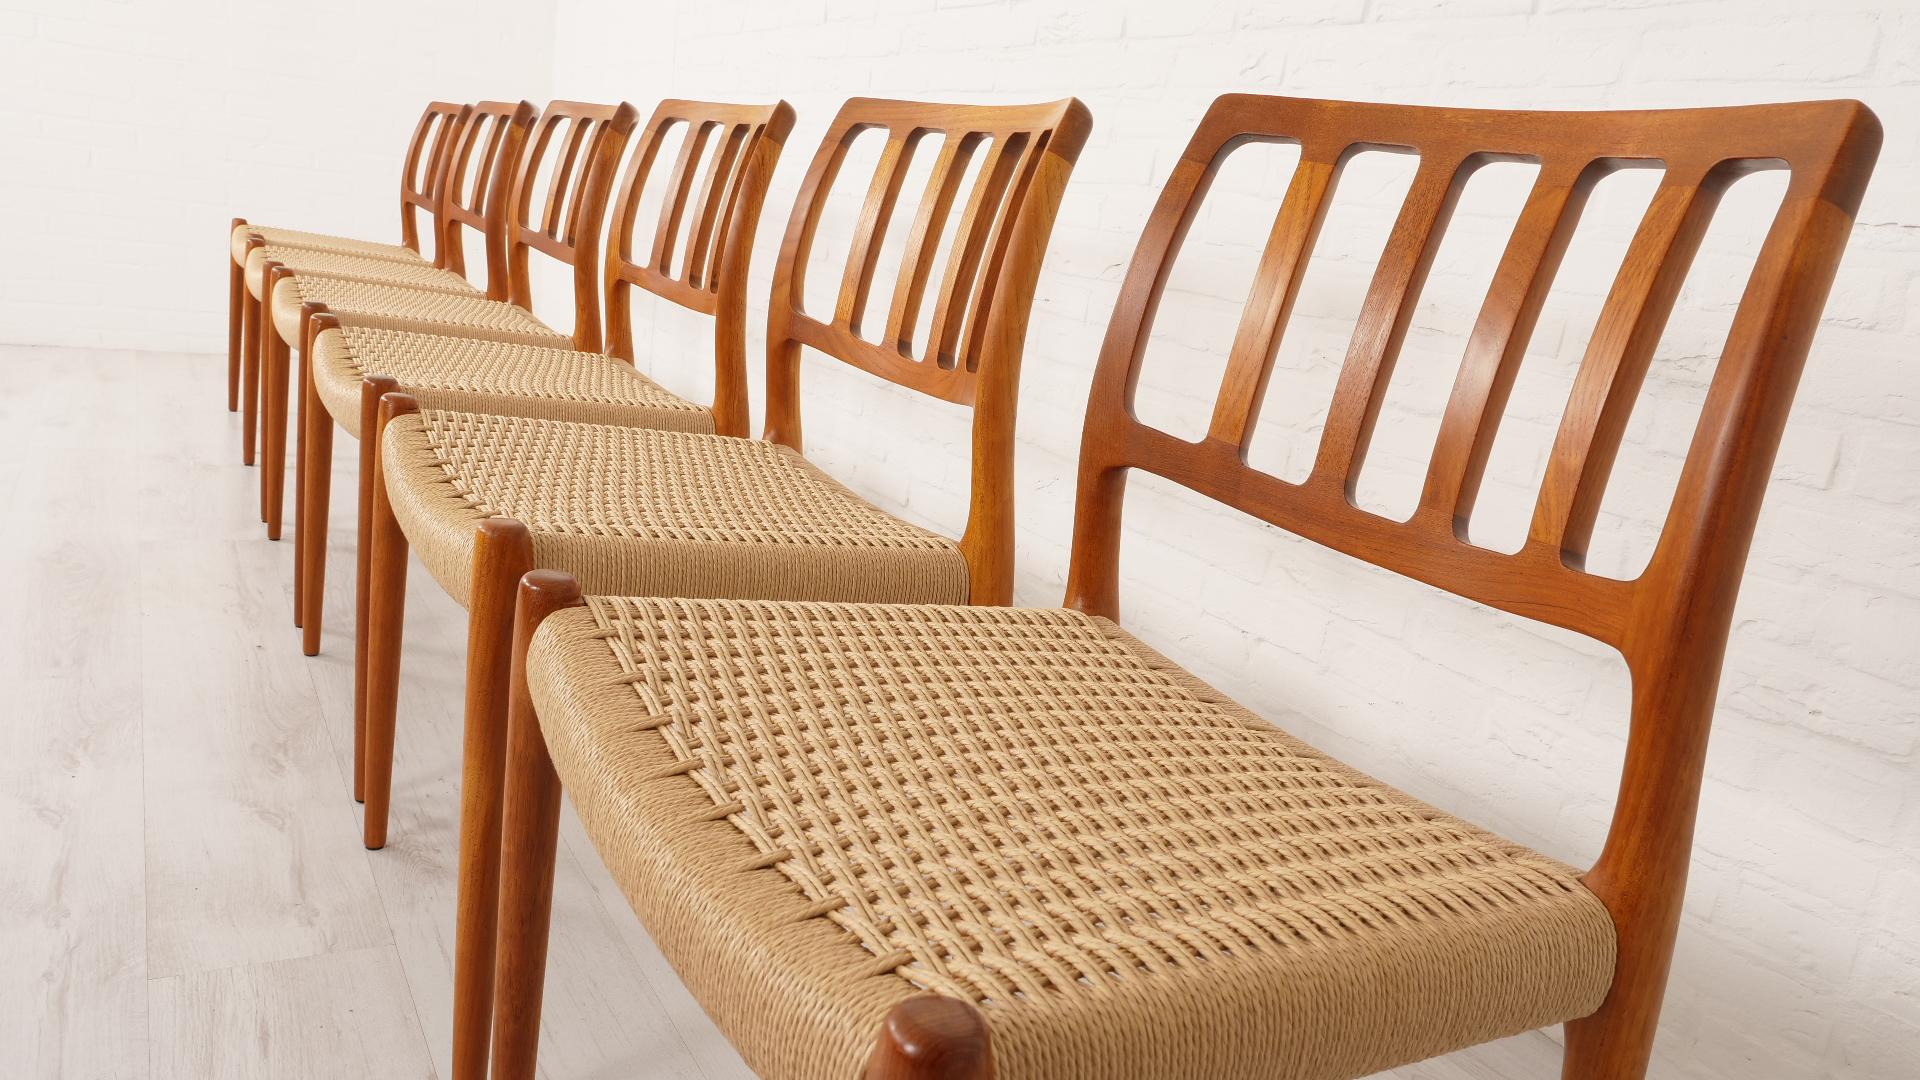 6 x Niels Otto Møller dining chairs  Model 83  Papercord  Teak  Restored For Sale 2